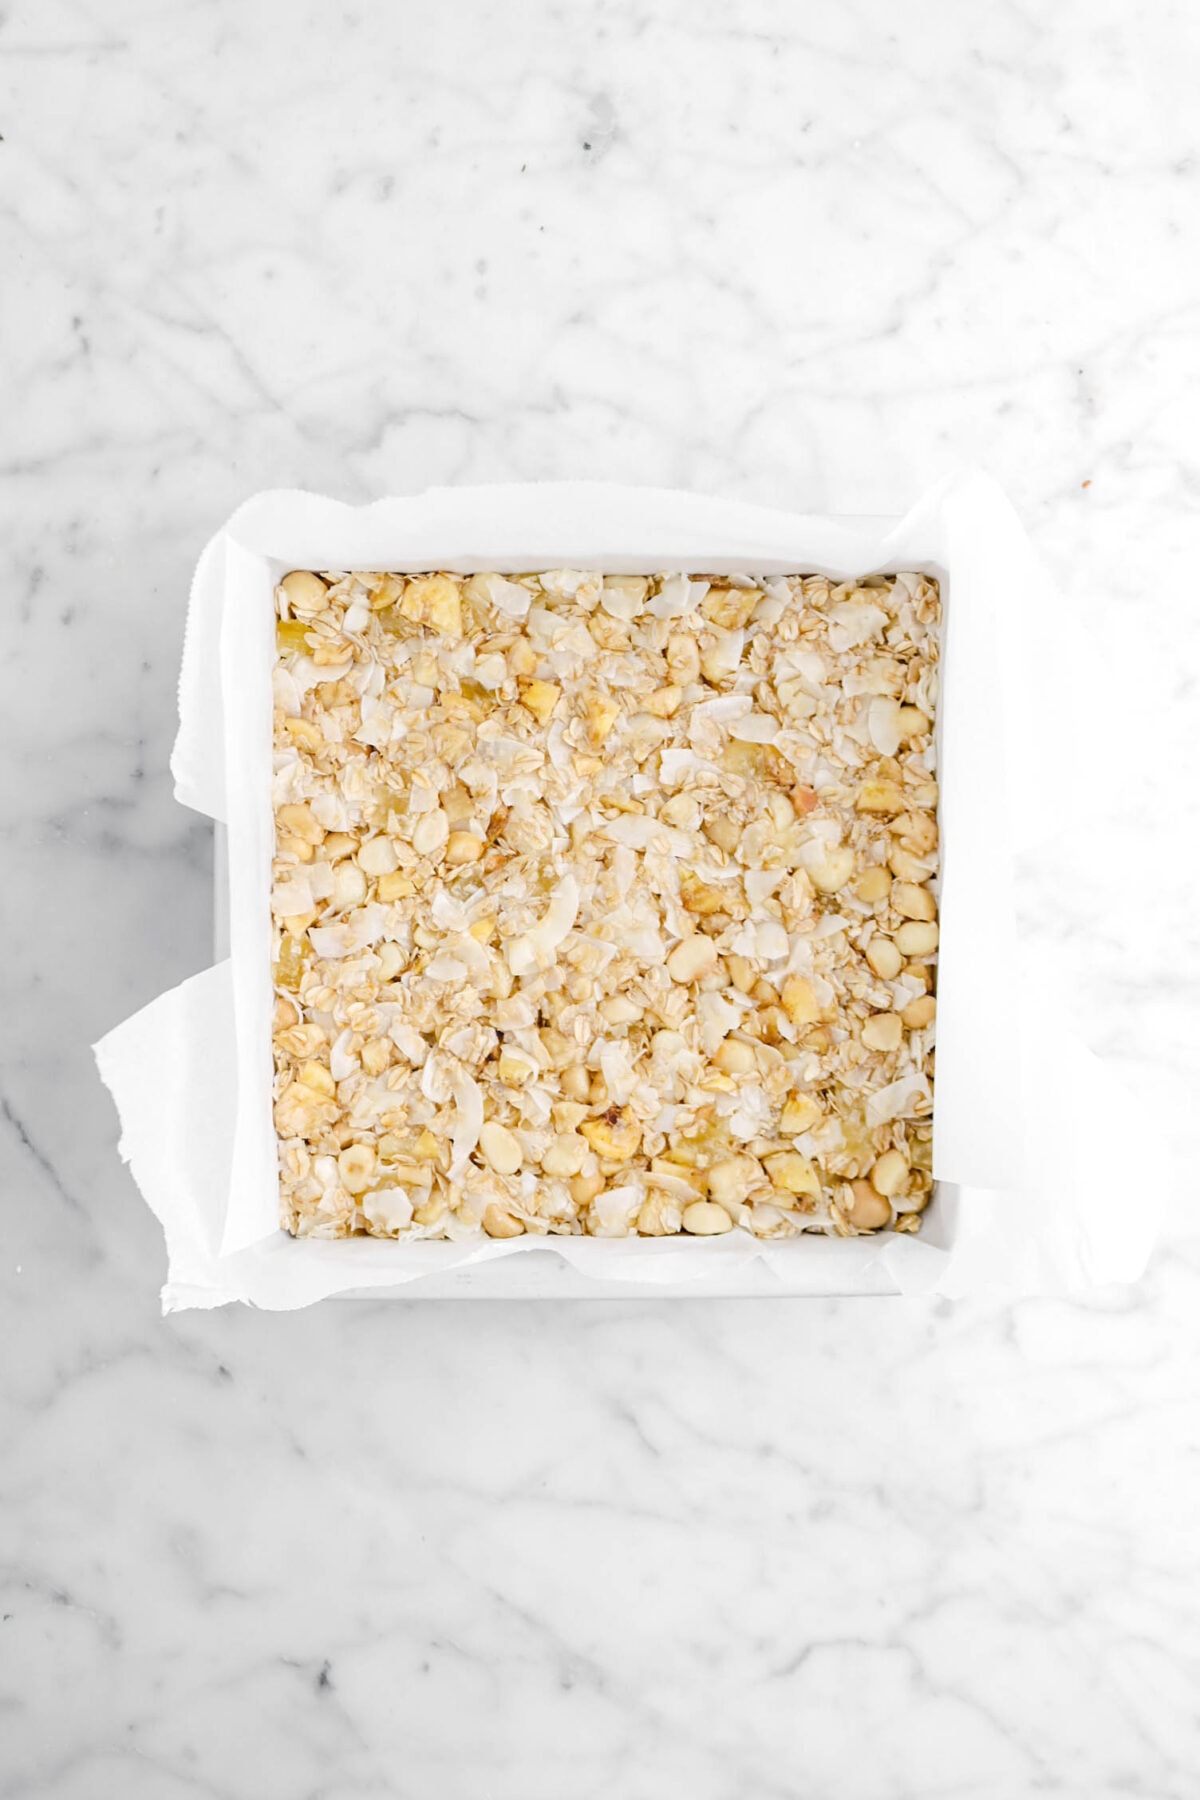 granola mixture packed into lined square pan